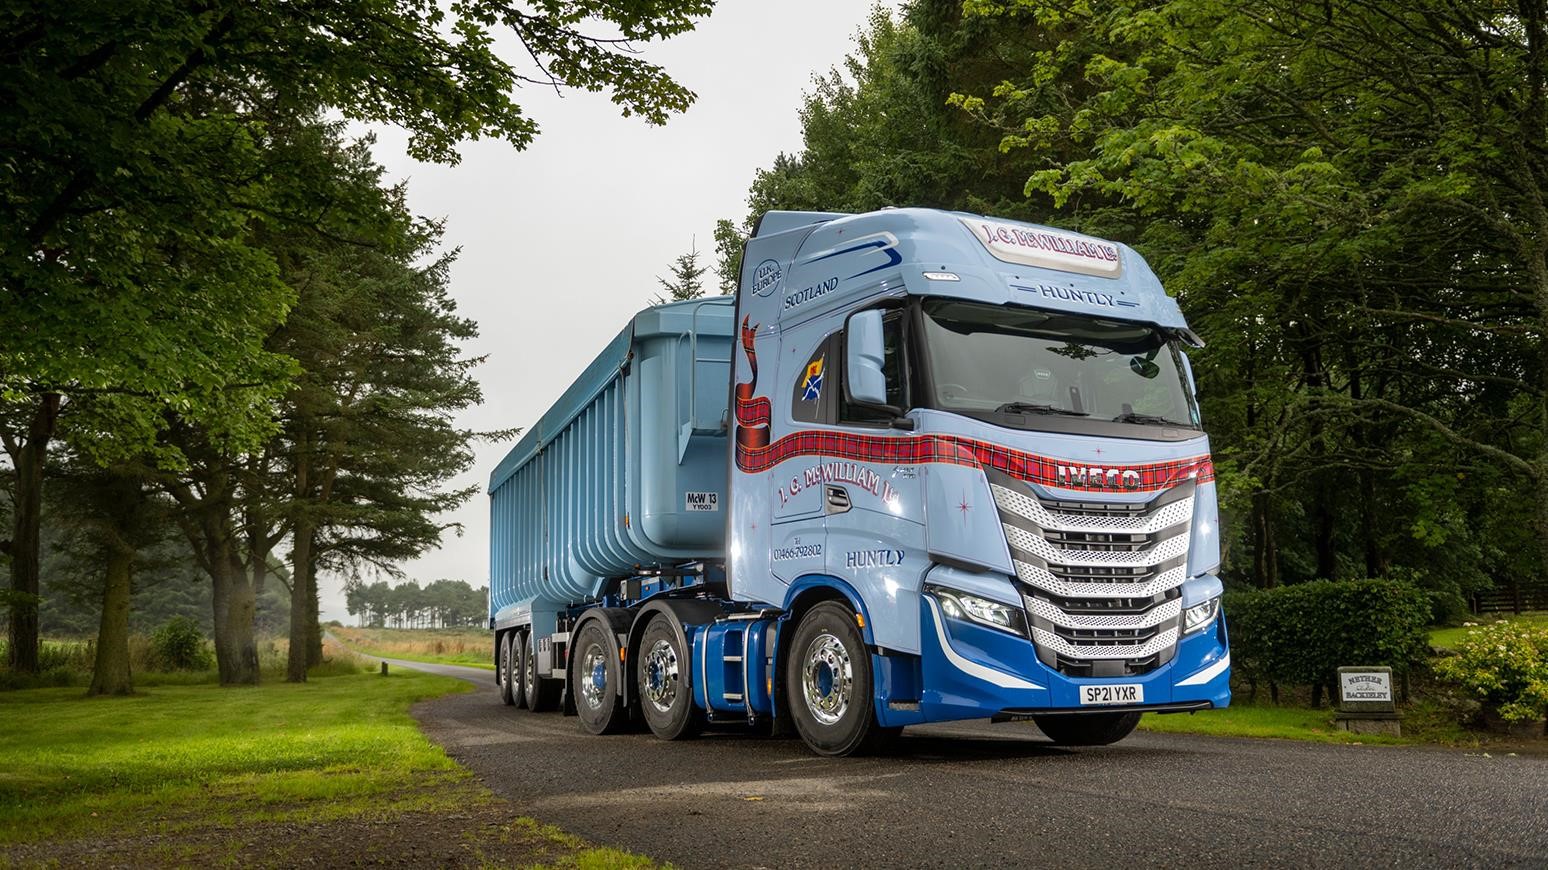 Haulier JG McWilliam Purchases Its First IVEVO S-WAY, Decked Out In Two-Tone Blue Colour Scheme & Tartan Ribbon